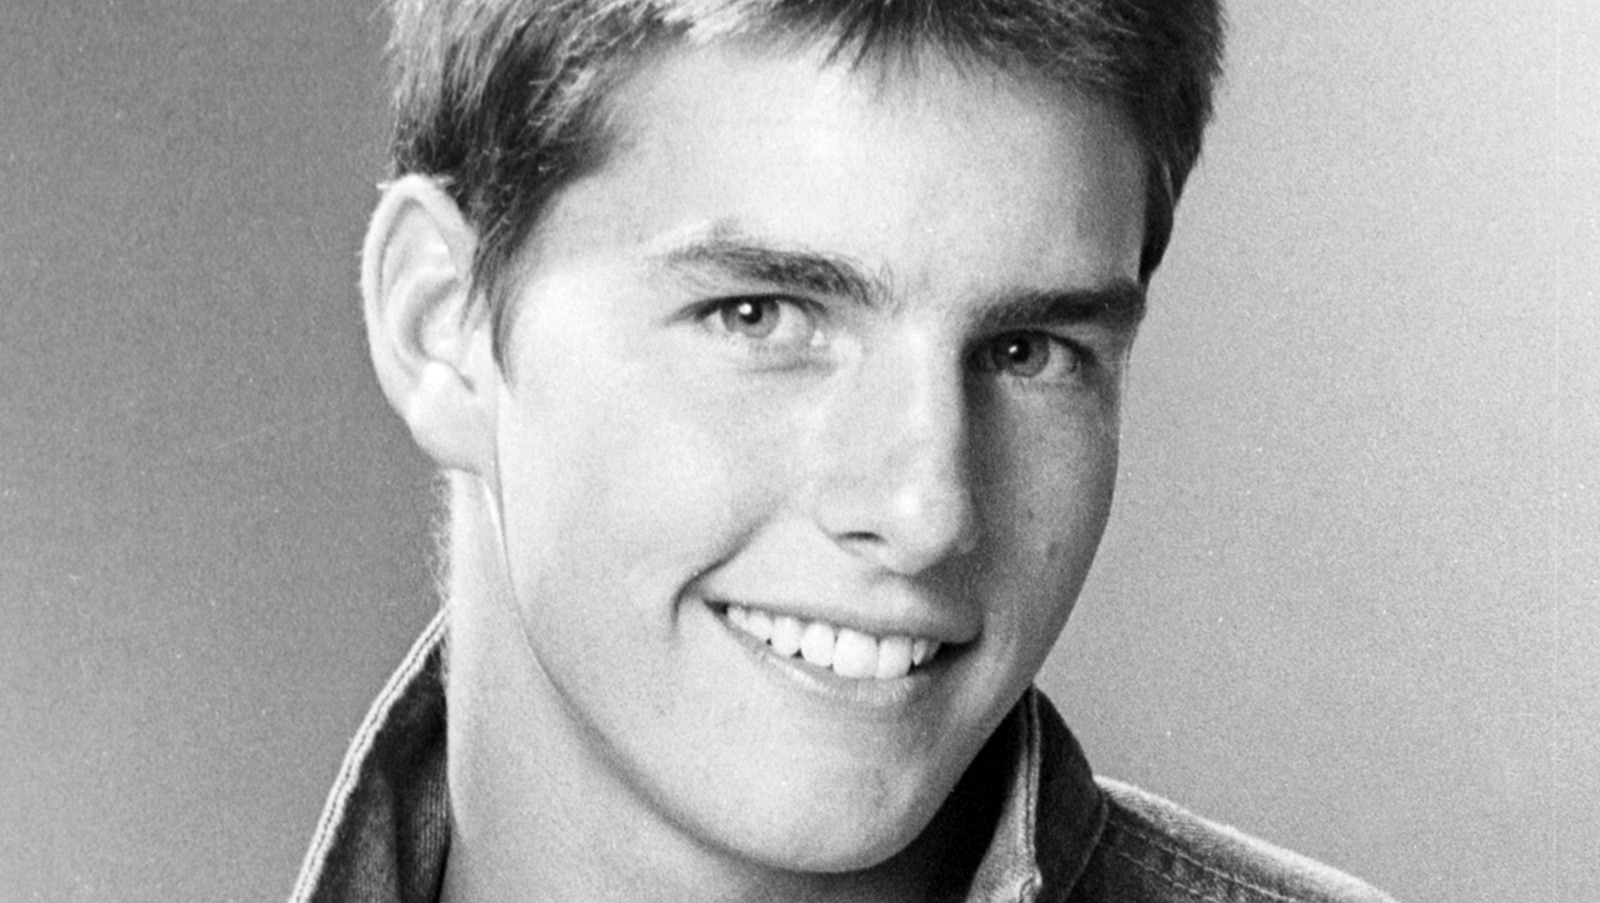 actor tom cruise how old is he